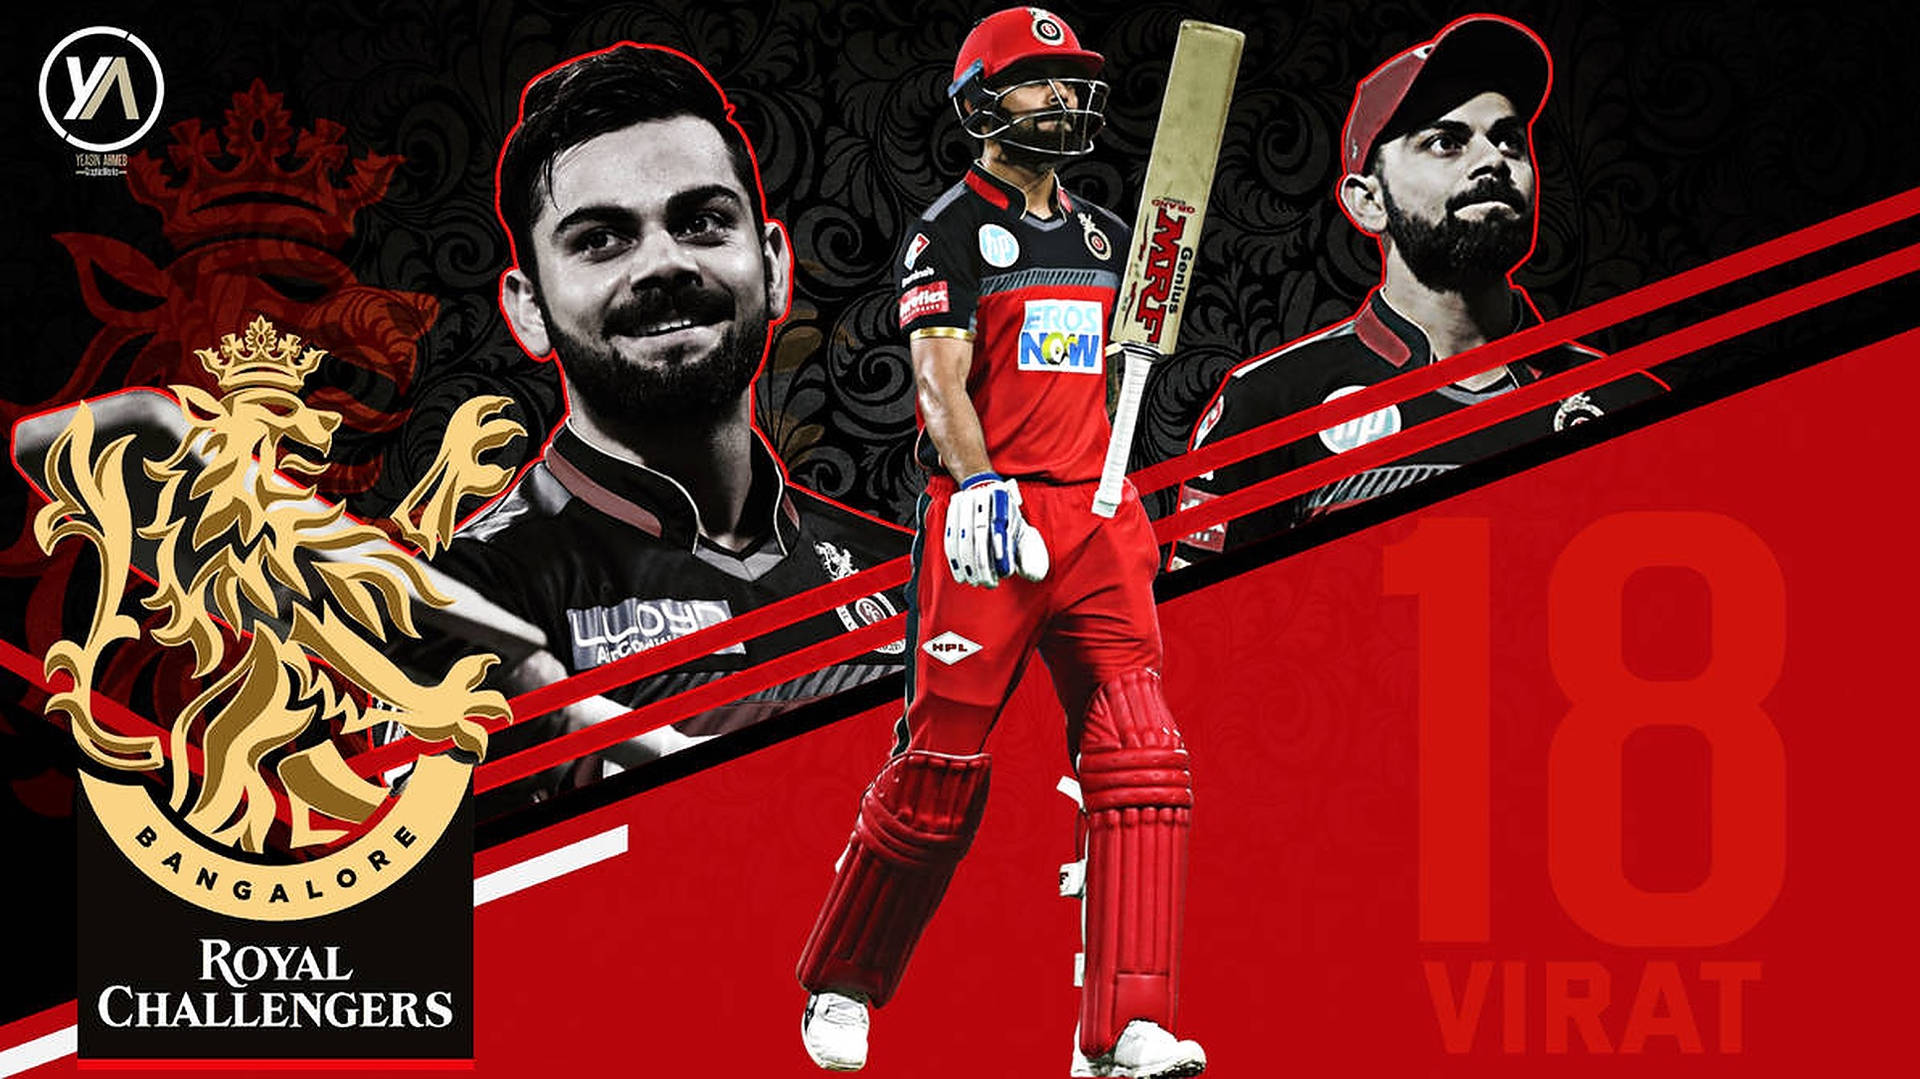 Royal Challengers Bangalore Player 18 Background